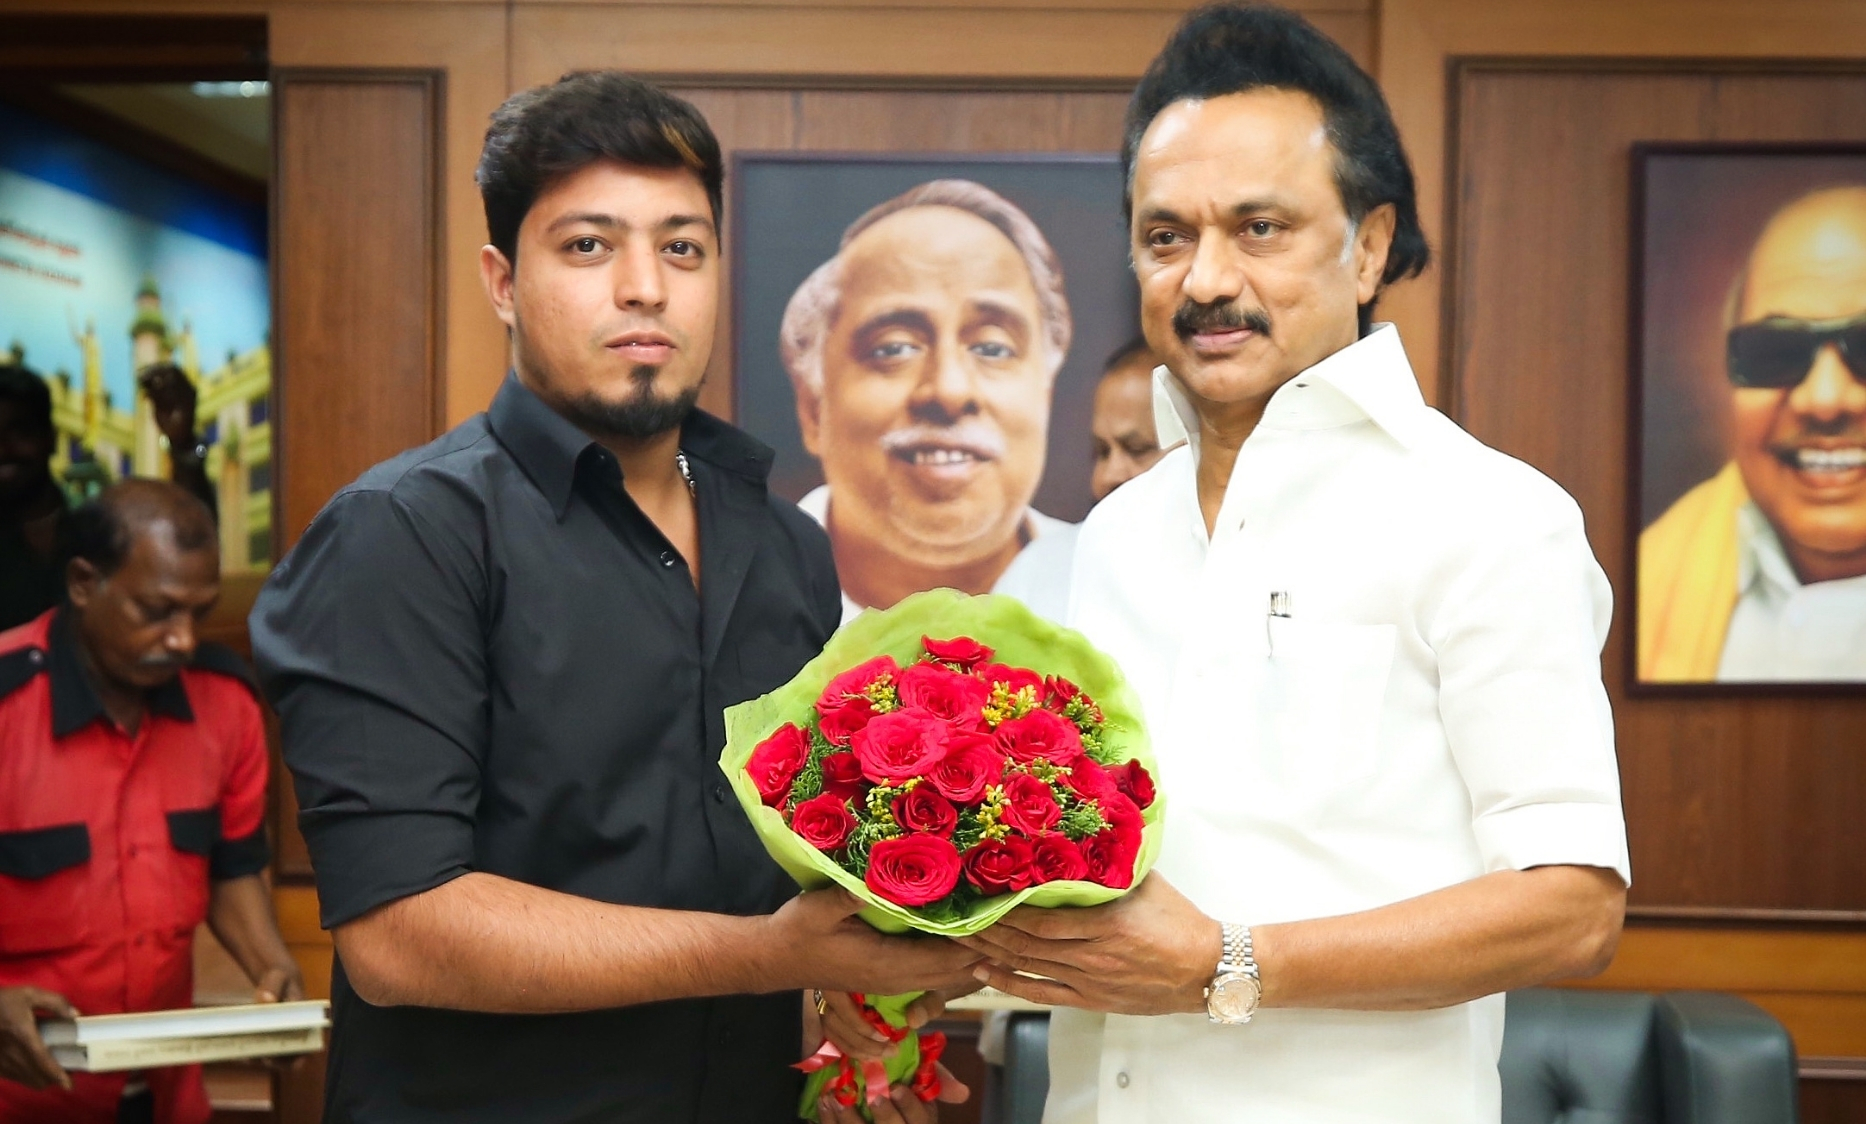 MD khan- 'Voice of People' congratulates CM MK Stalin for his success - Digpu News